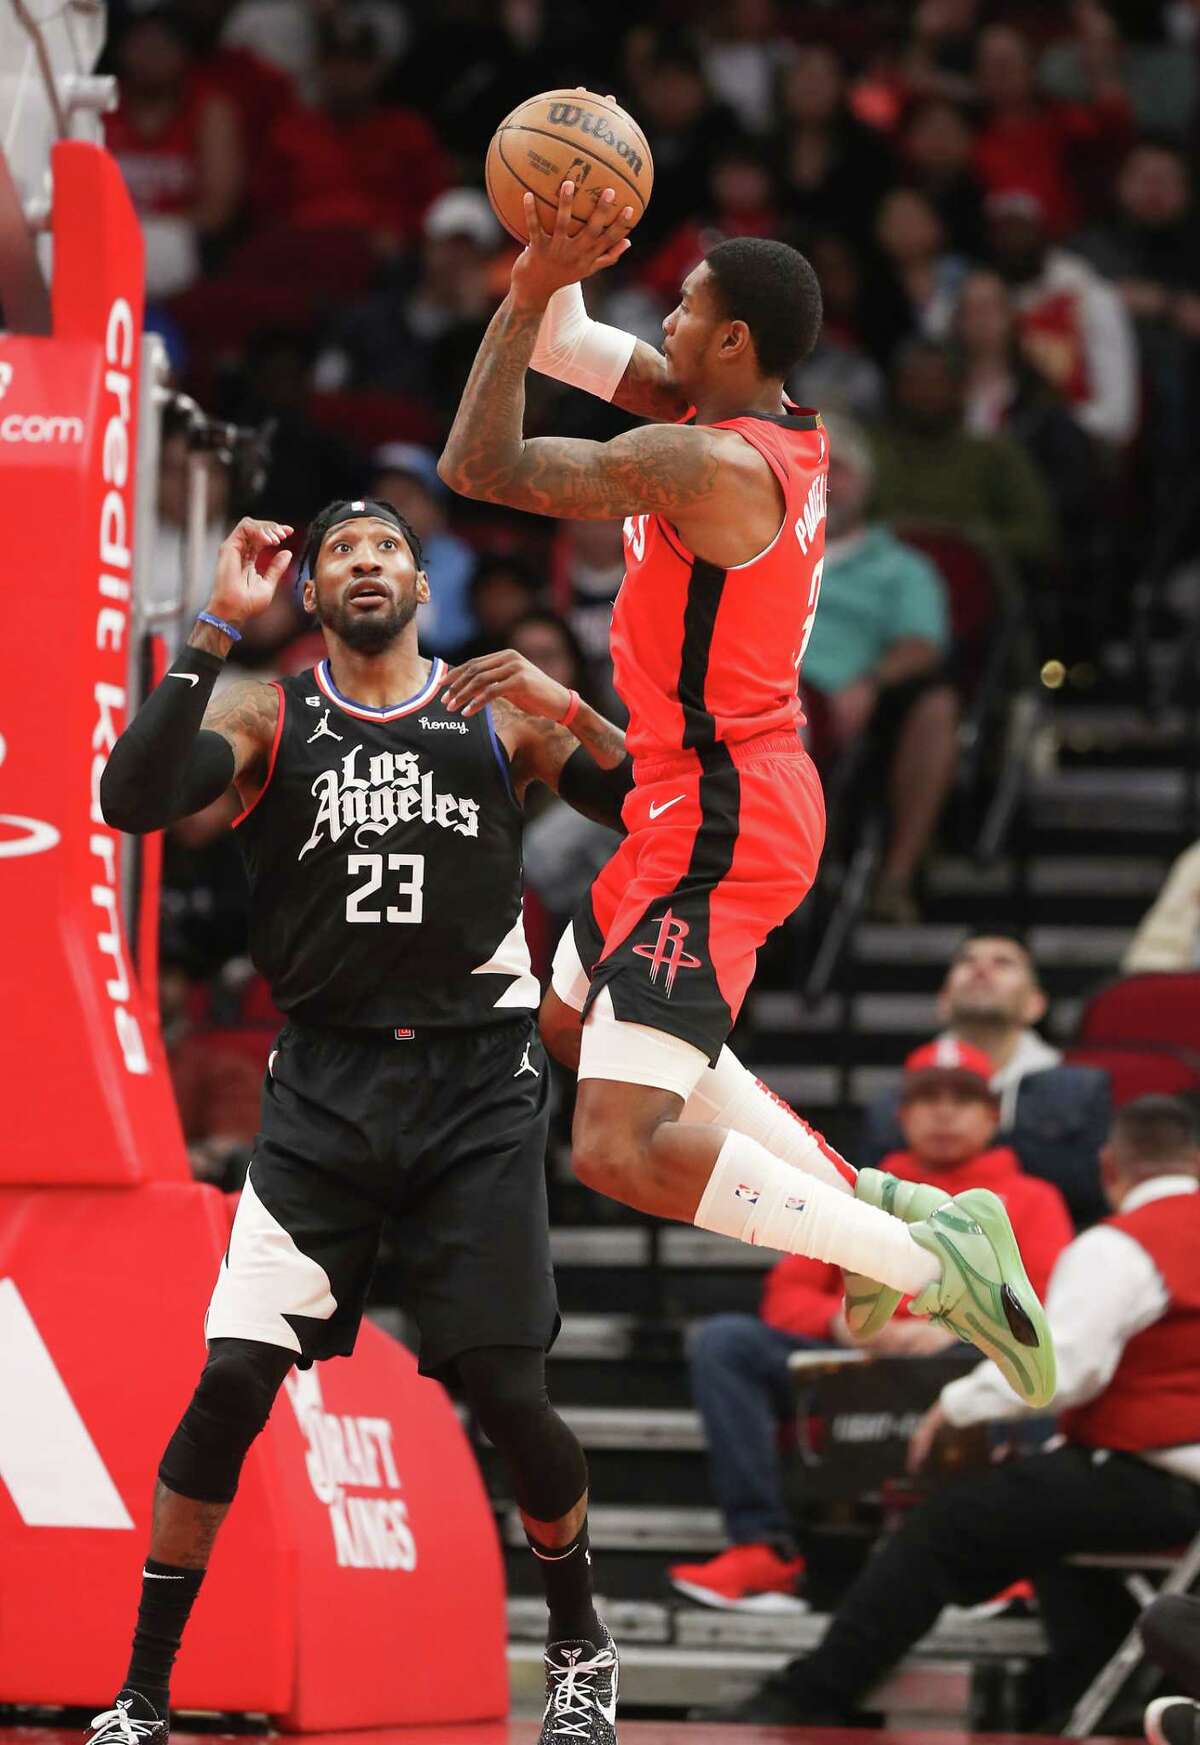 Houston Rockets guard Kevin Porter Jr. (3) goes up for a jump shot against LA Clippers forward Robert Covington (23) in the first half of game action at the Toyota Center on Monday, Nov. 14, 2022 in Houston.